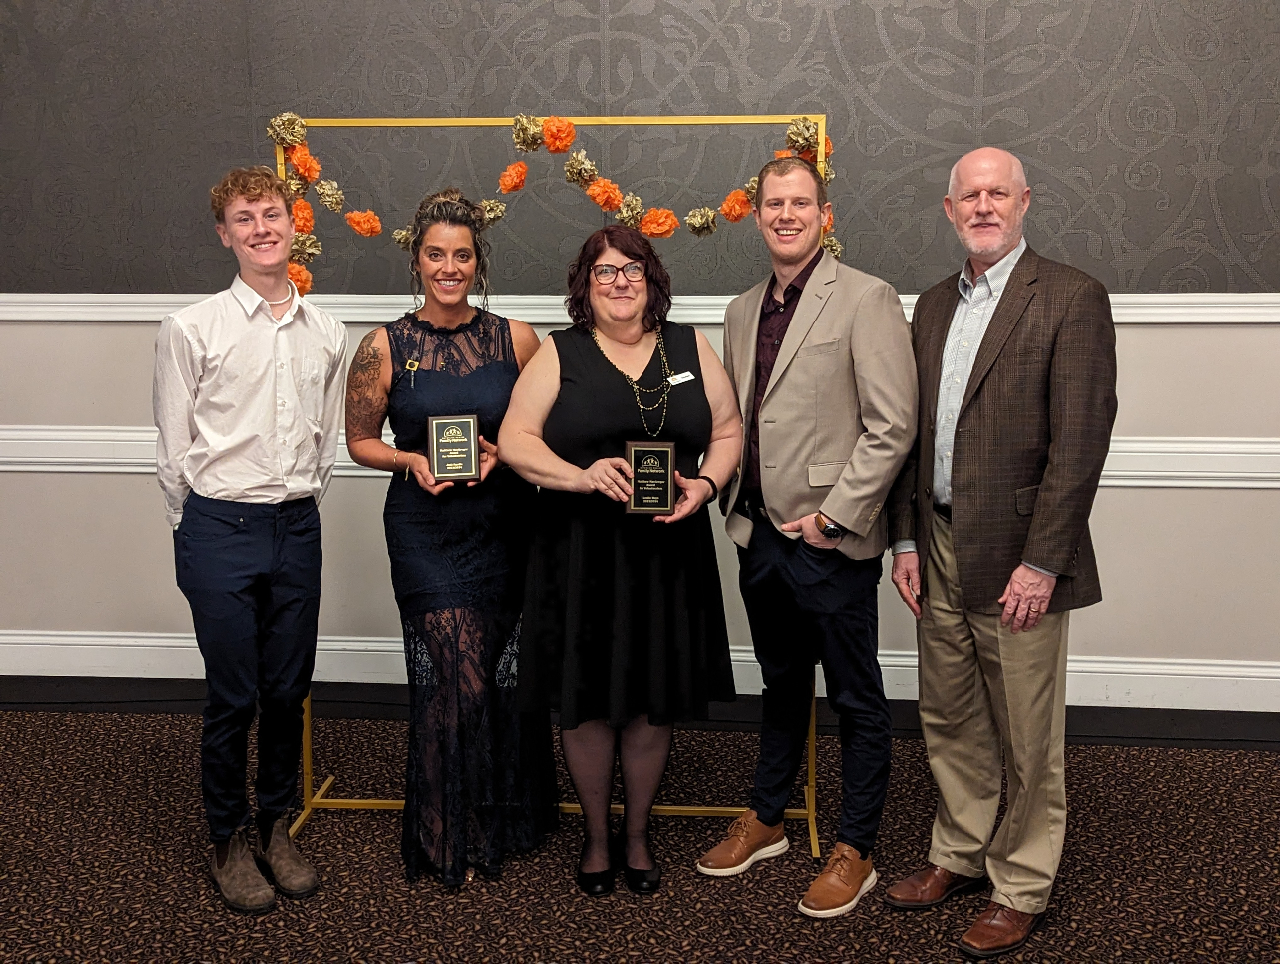 This photo features the Matthew McGregor Volunteer Award winners, Jodi and Leslie, posing and smiling with the McGregor family. All parties are dressed in formal attire, dark dresses and lighter-coloured suits.